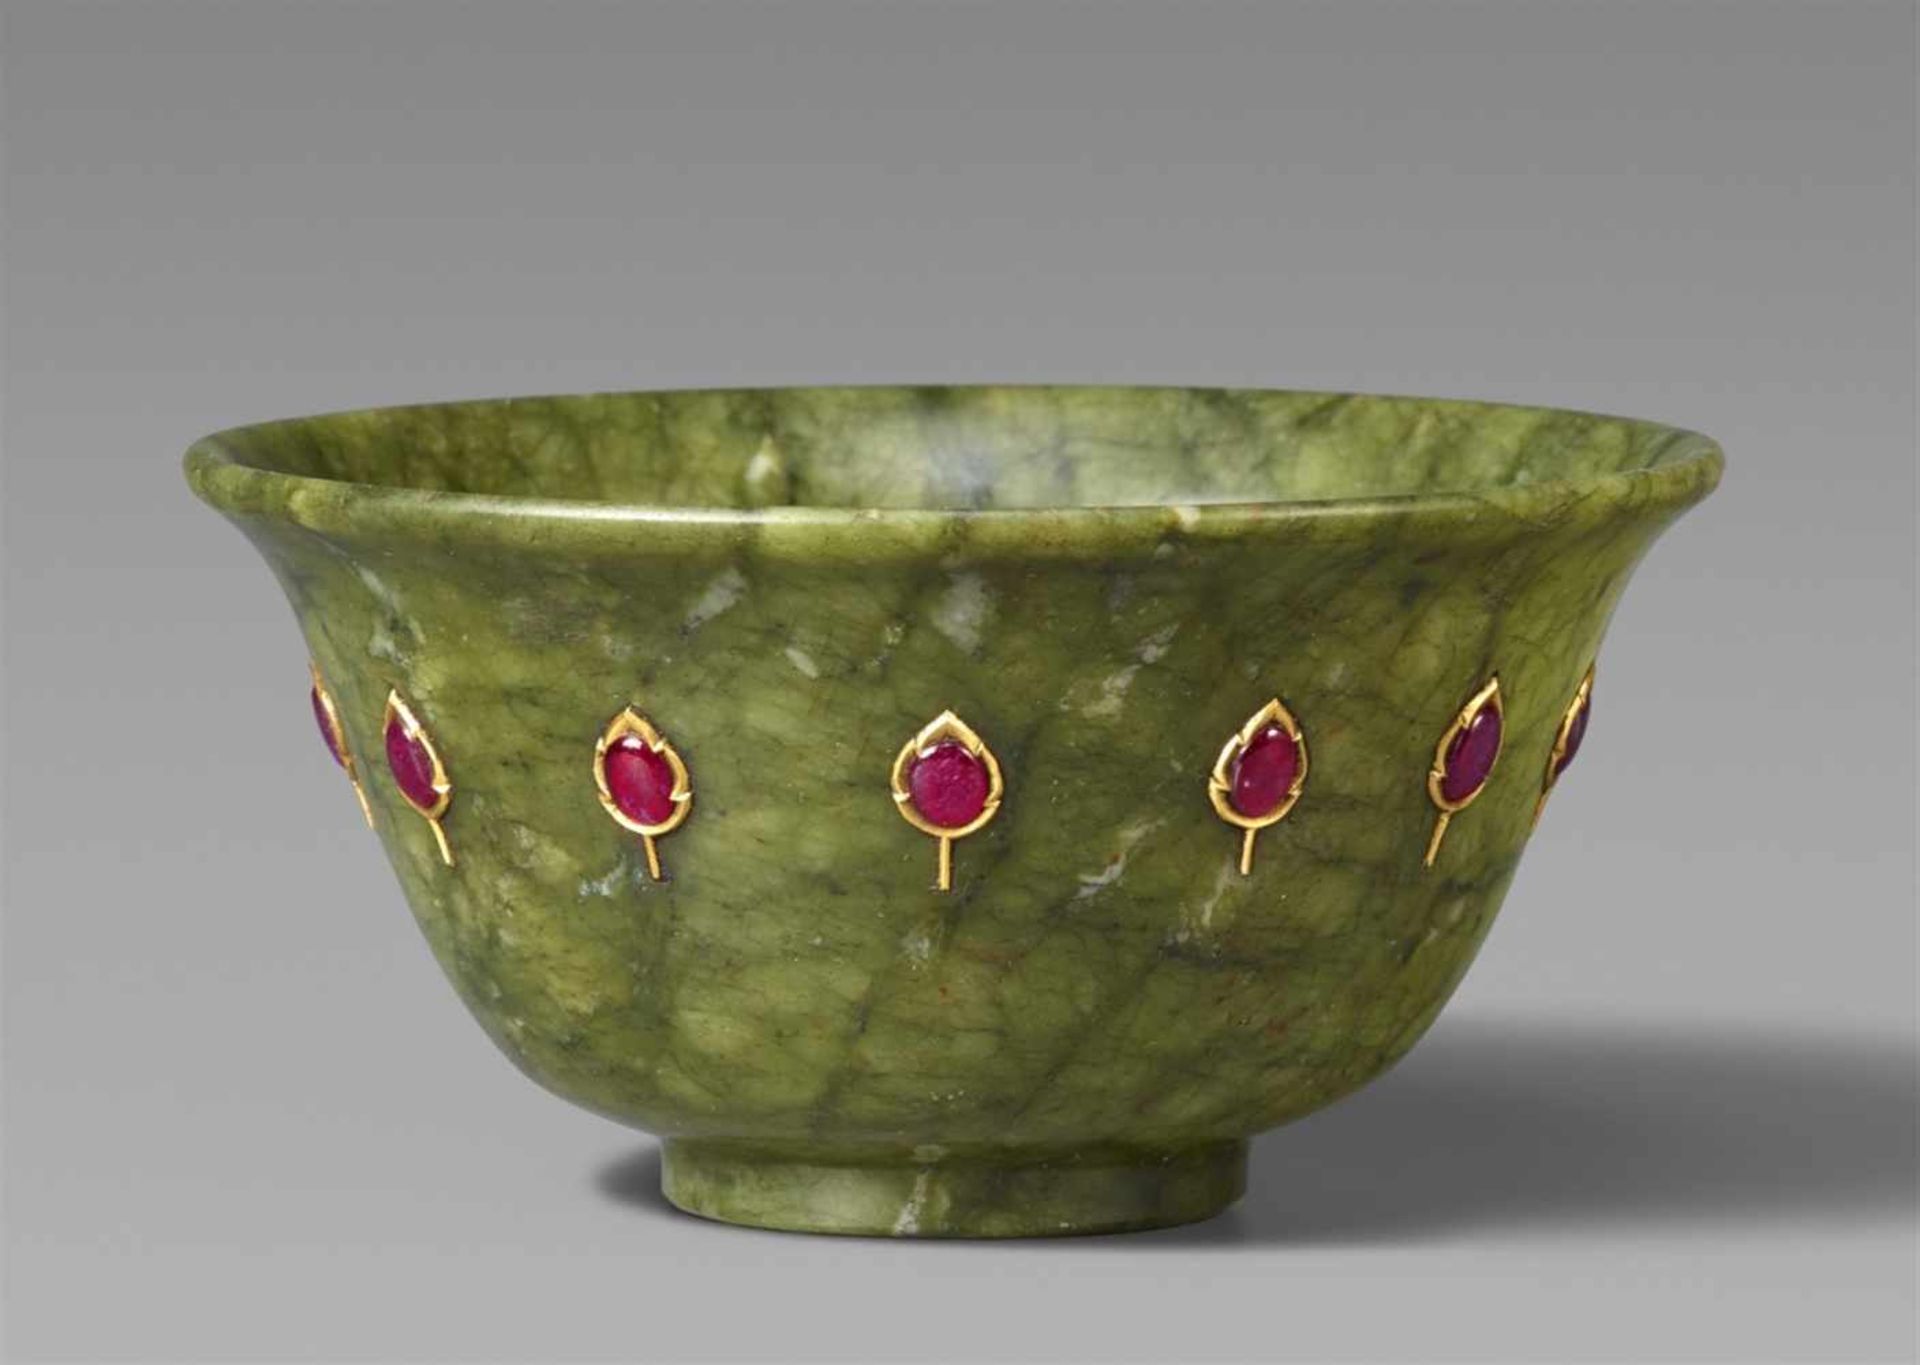 A small North Indian Mughal style moss-green nephrite bowl